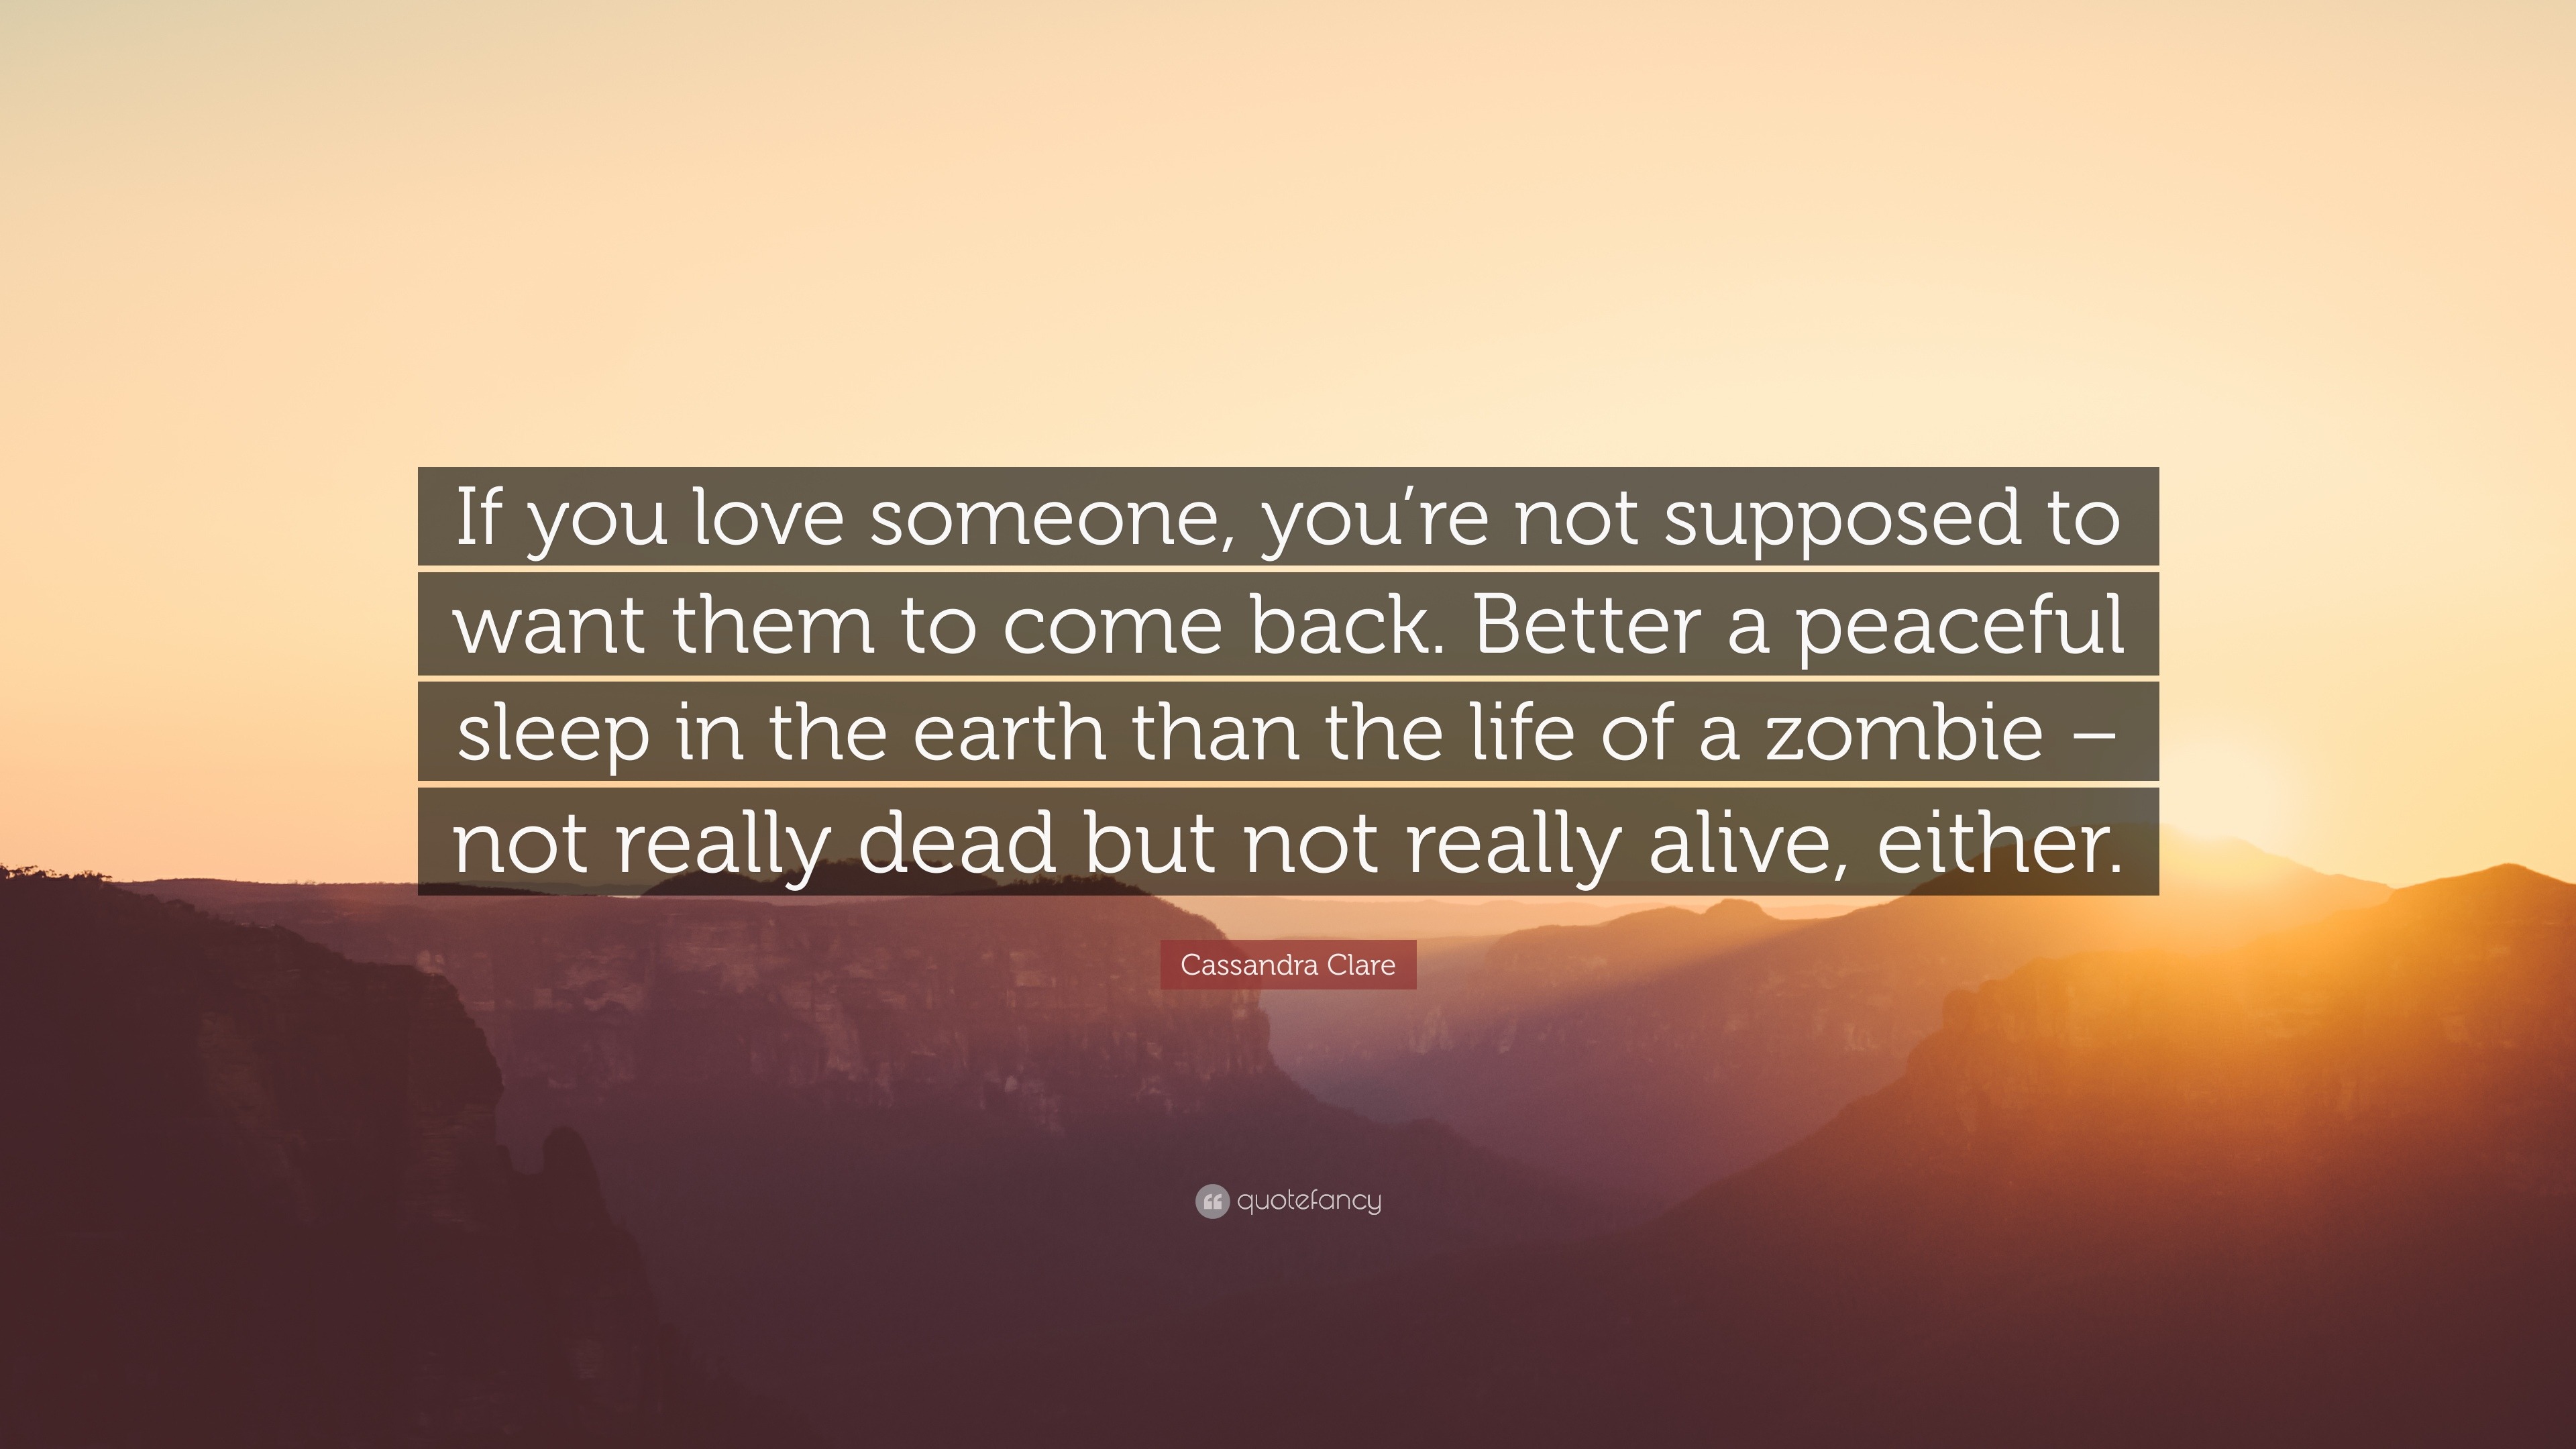 Cassandra Clare Quote “If you love someone you re not supposed to